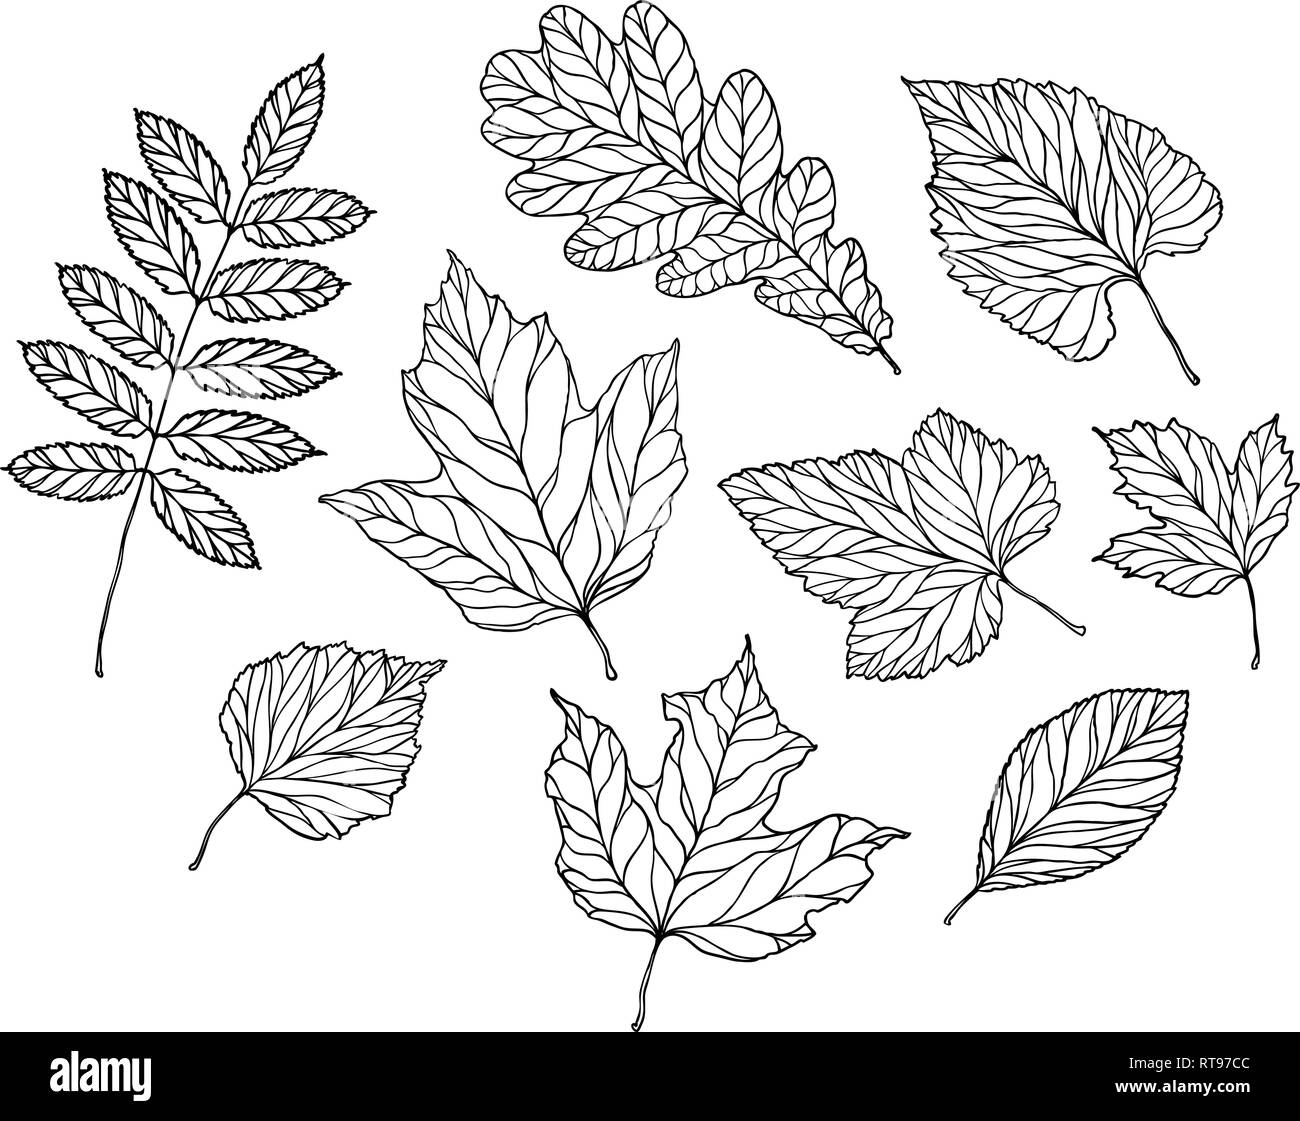 Set of leaves. Nature, foliage sketch. Decorative vector illustration Stock Vector